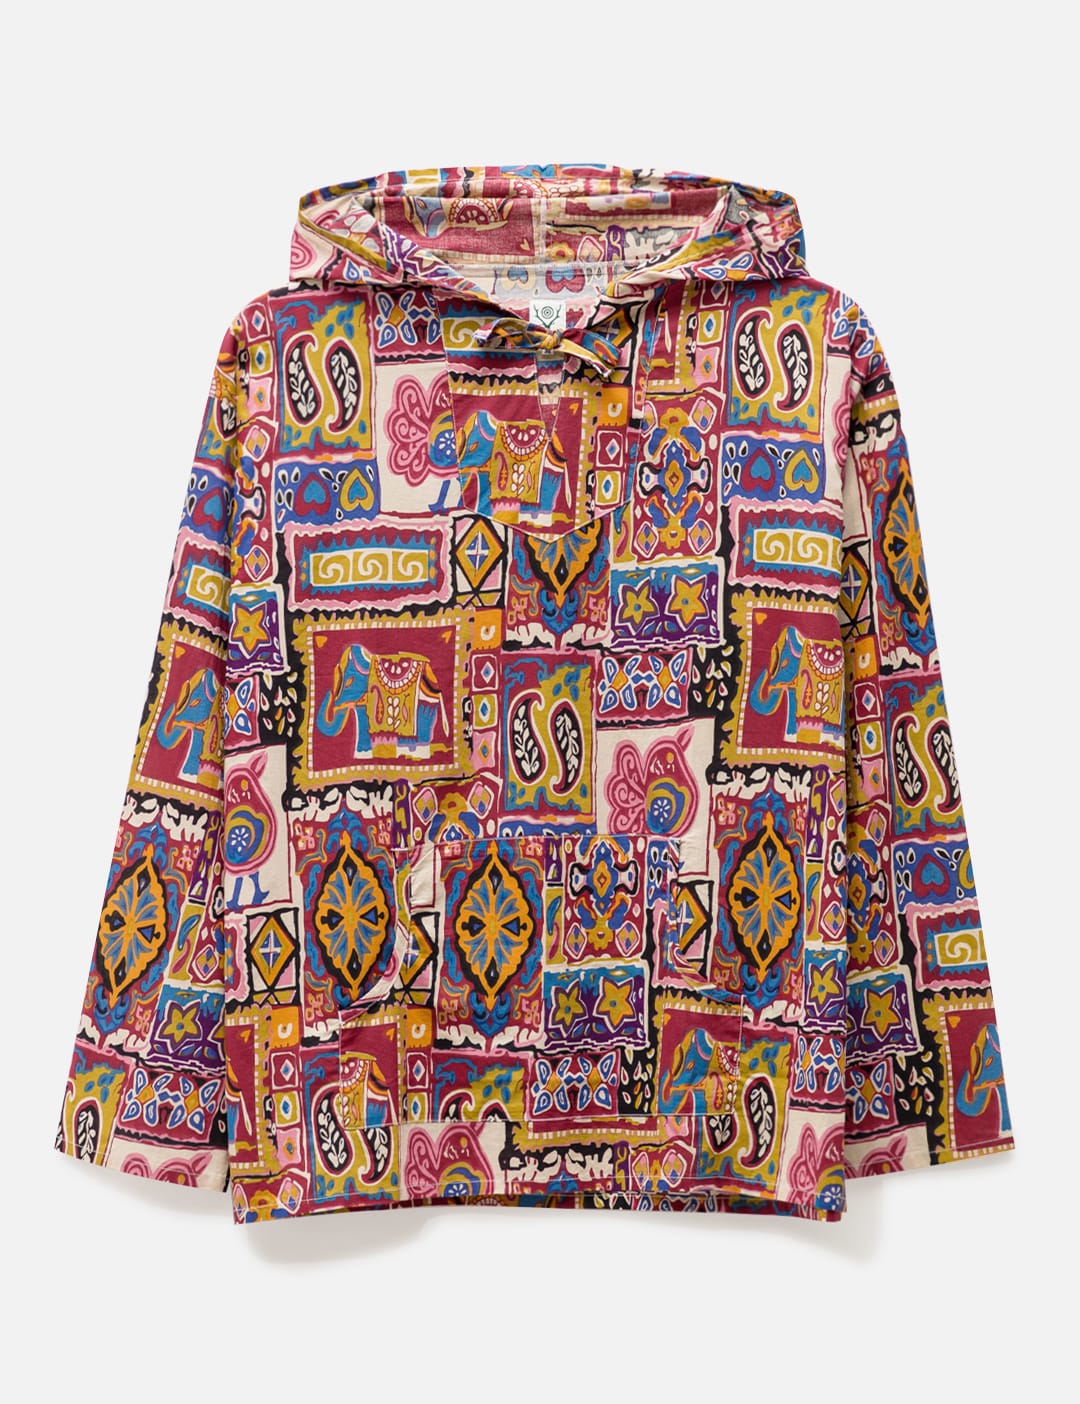 South2 West8 - MEXICAN PARKA | HBX - Globally Curated Fashion and 